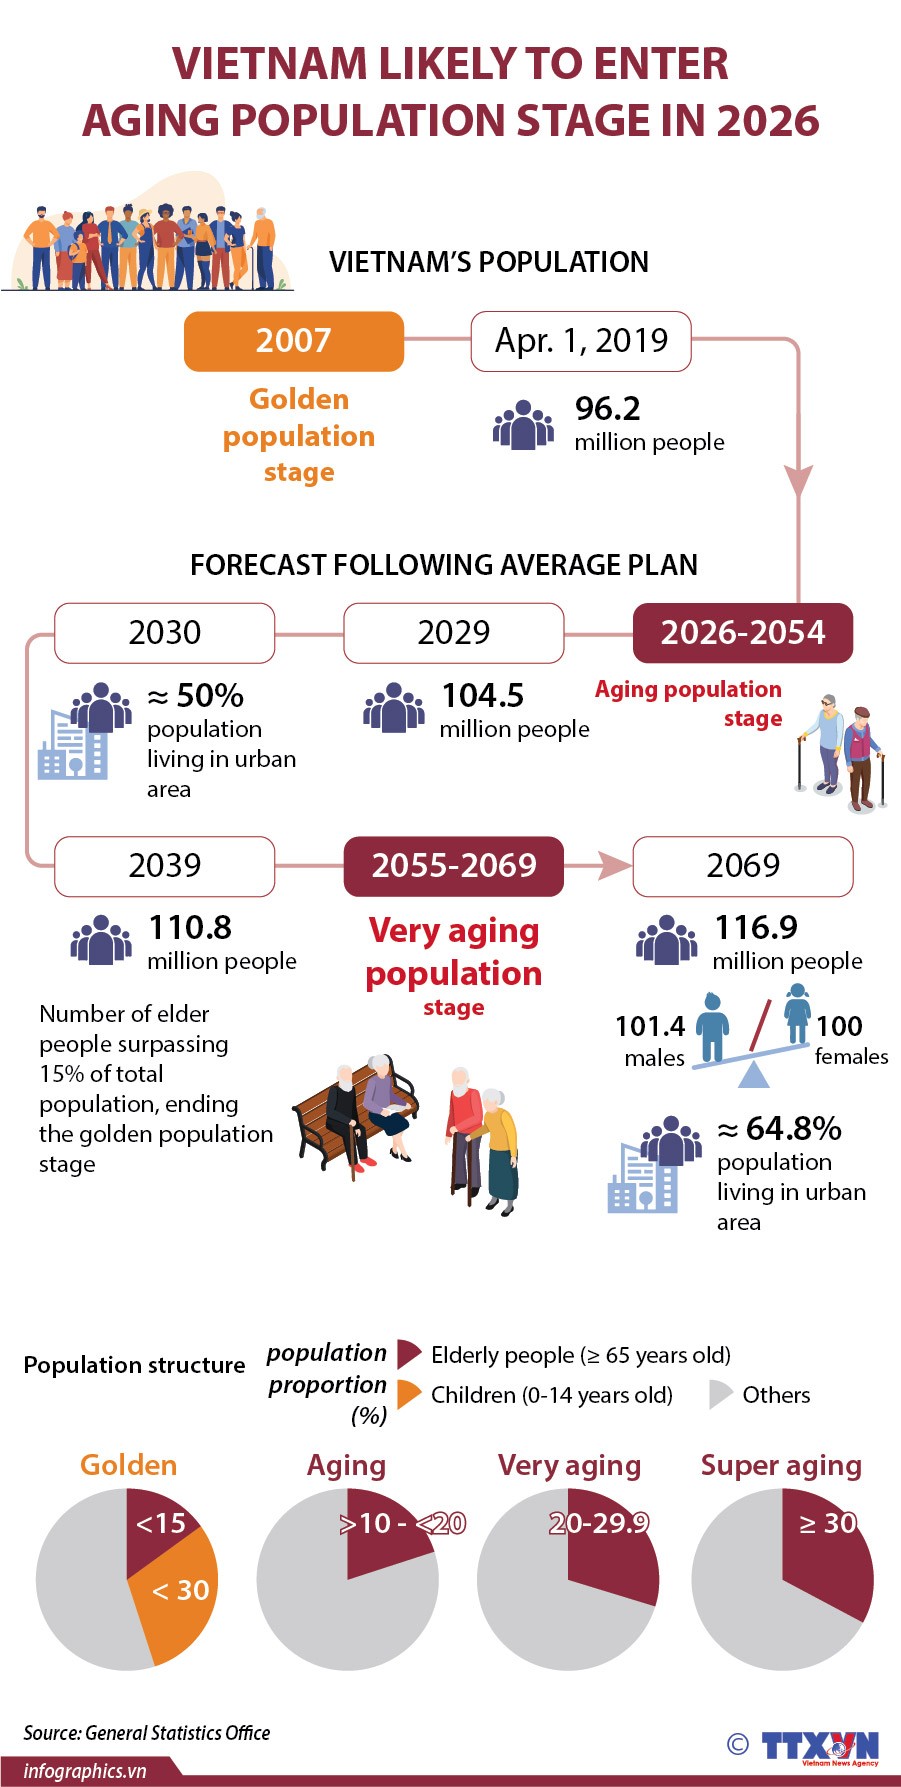 Viet Nam to enter aging population stage in 2026